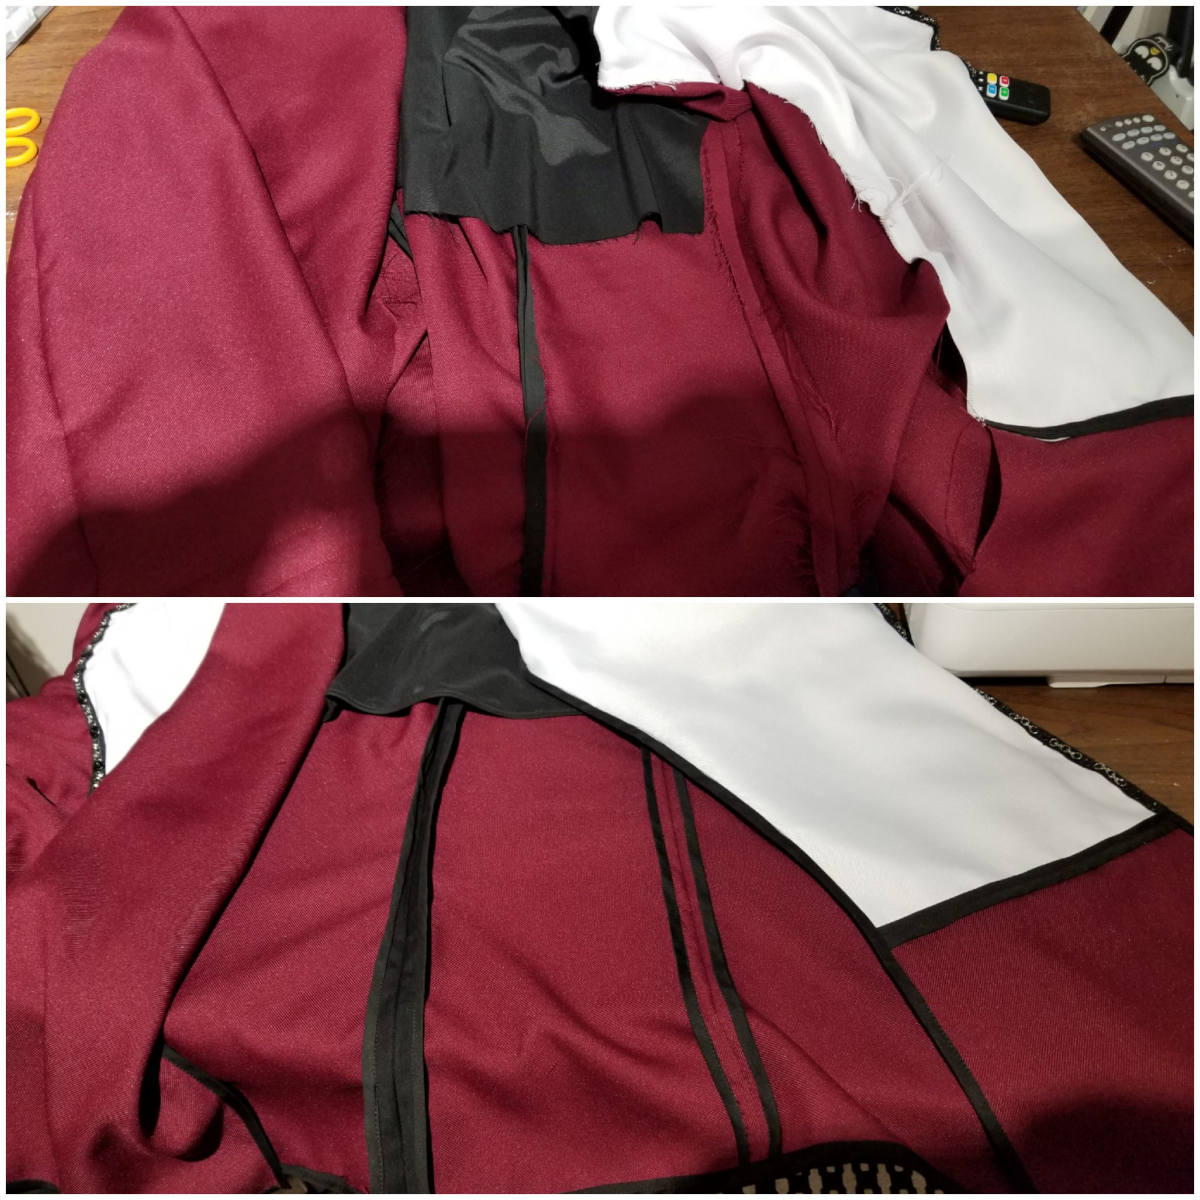 October 3, 2019: Jacket lining is complete